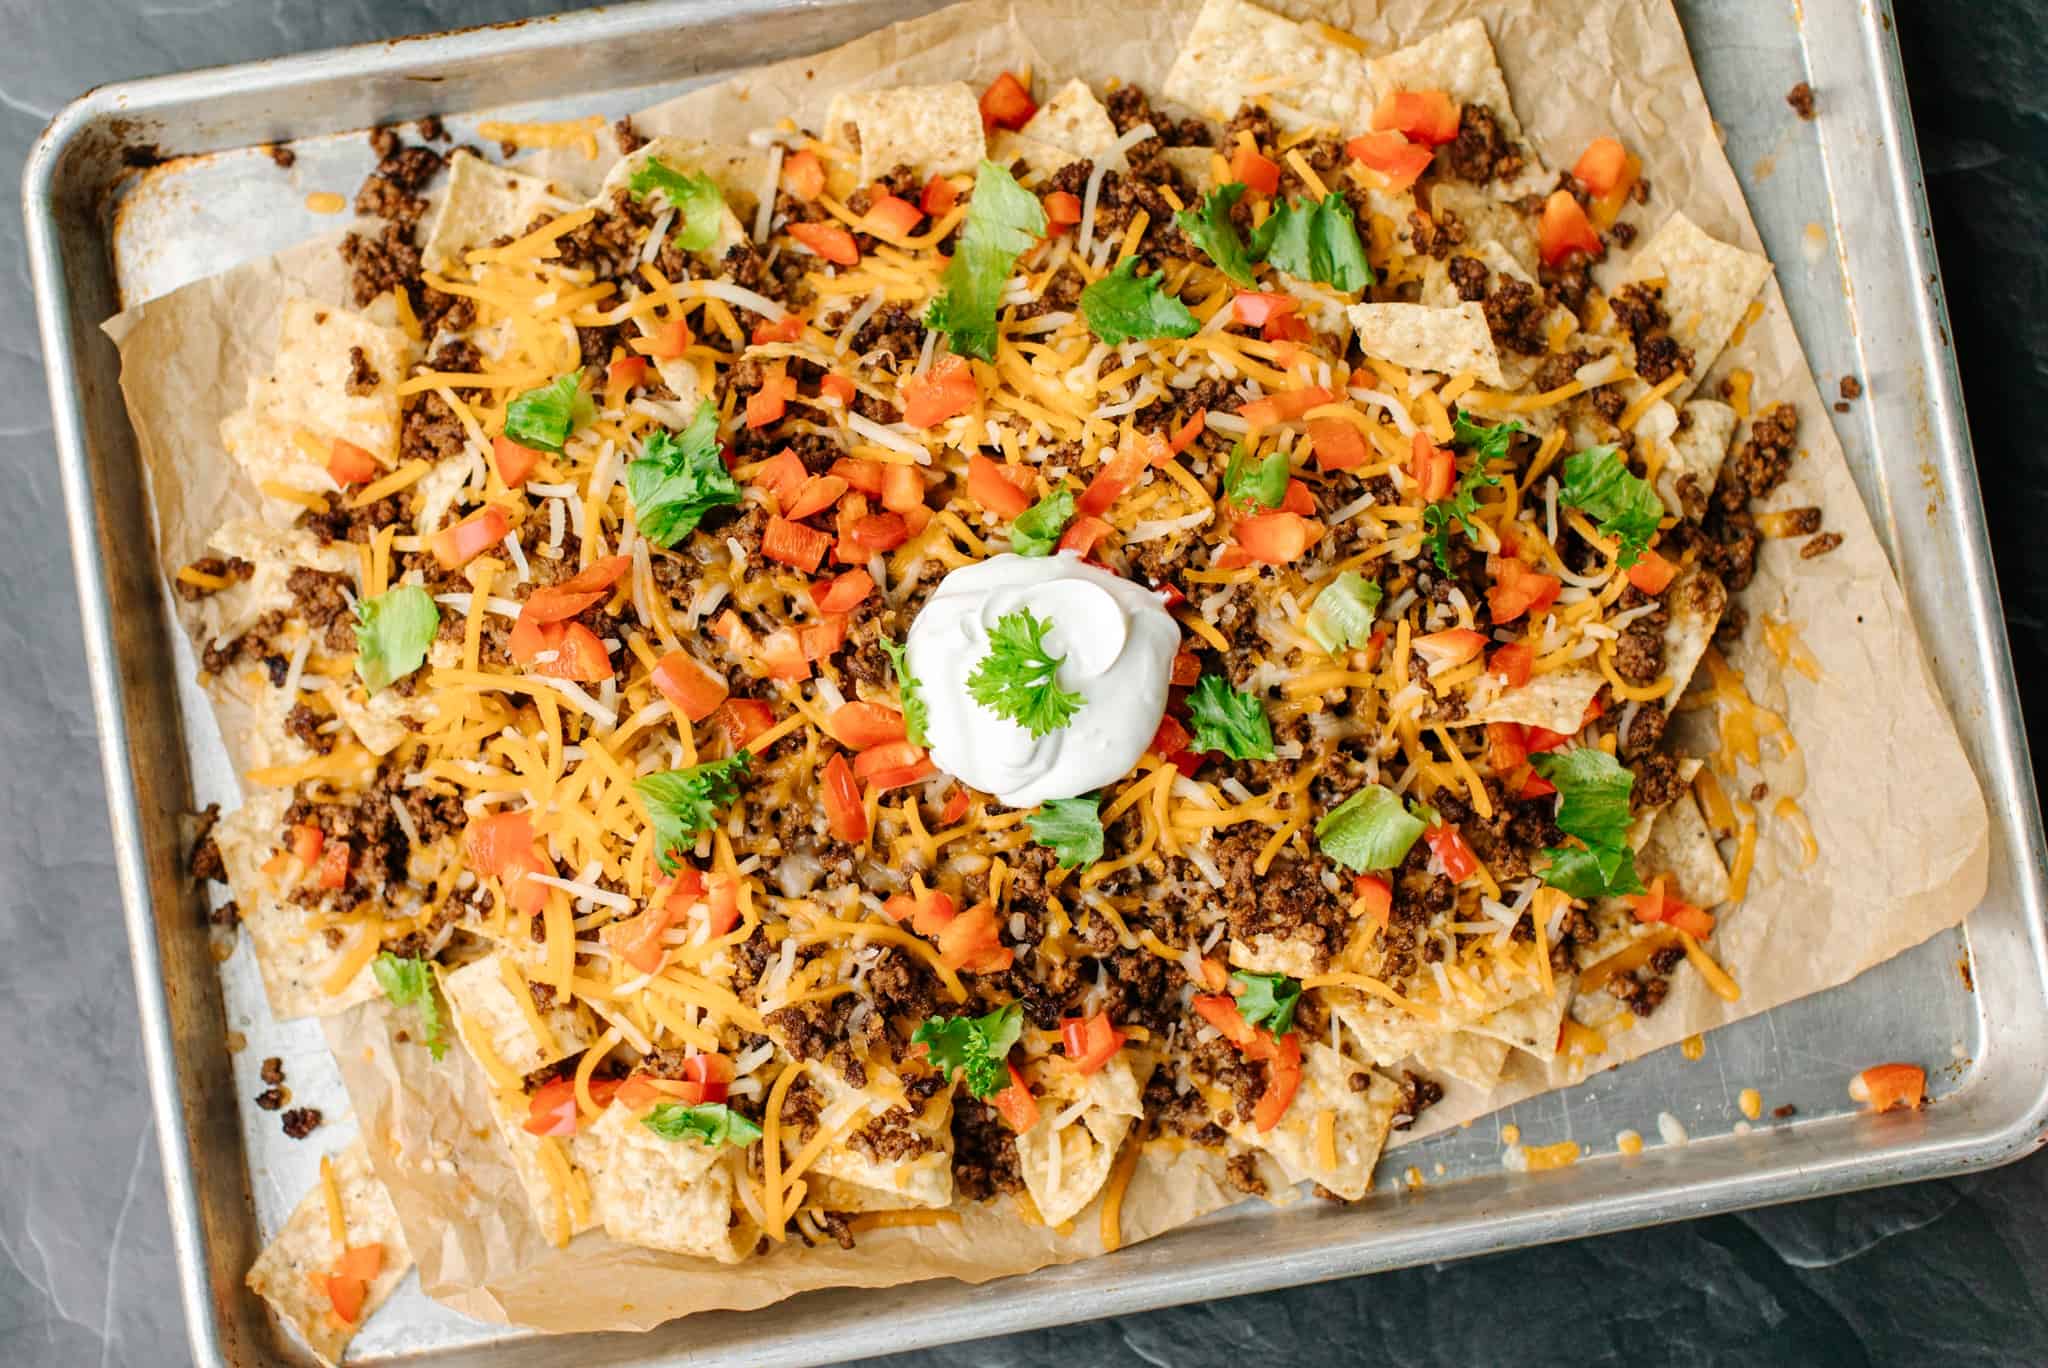 Blackstone Nachos - a sheet pan with tortilla strips, a layer of taco meat, topped with a sprinkling of shredded Colby jack cheese, diced tomatoes, and shredded lettuce.  With a dollop of sour cream right on the top middle.